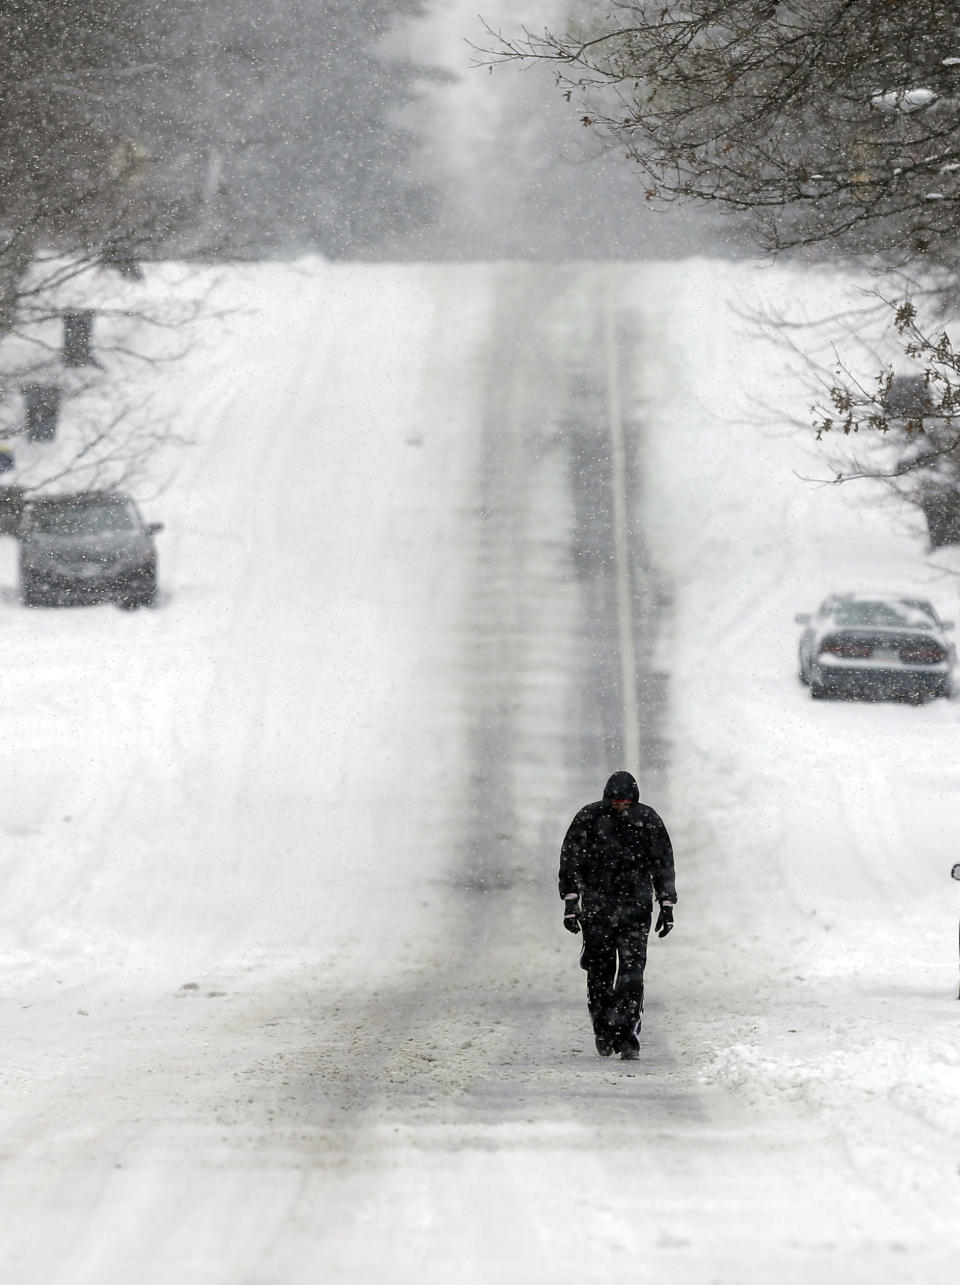 A pedestrian makes his way down a snow-covered street as snow continues to fall in Indianapolis, Thursday, Jan. 2, 2014. Over 5 inches of snow fell in Central Indiana. (AP Photo/Michael Conroy)